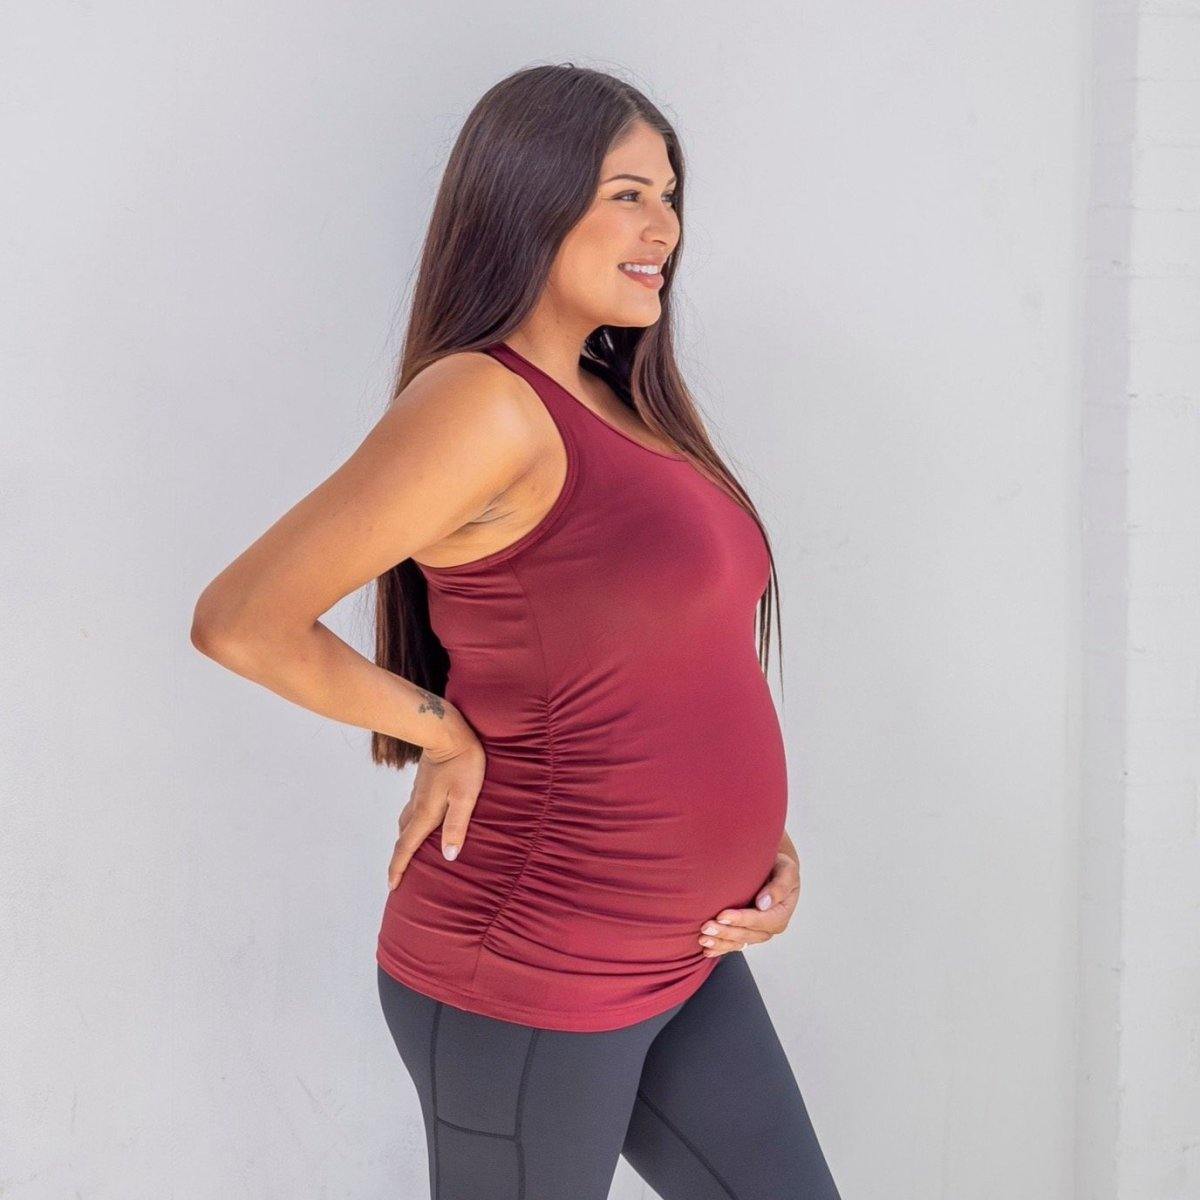 LJ Maternity Cropped Bump Active Tee, Pink